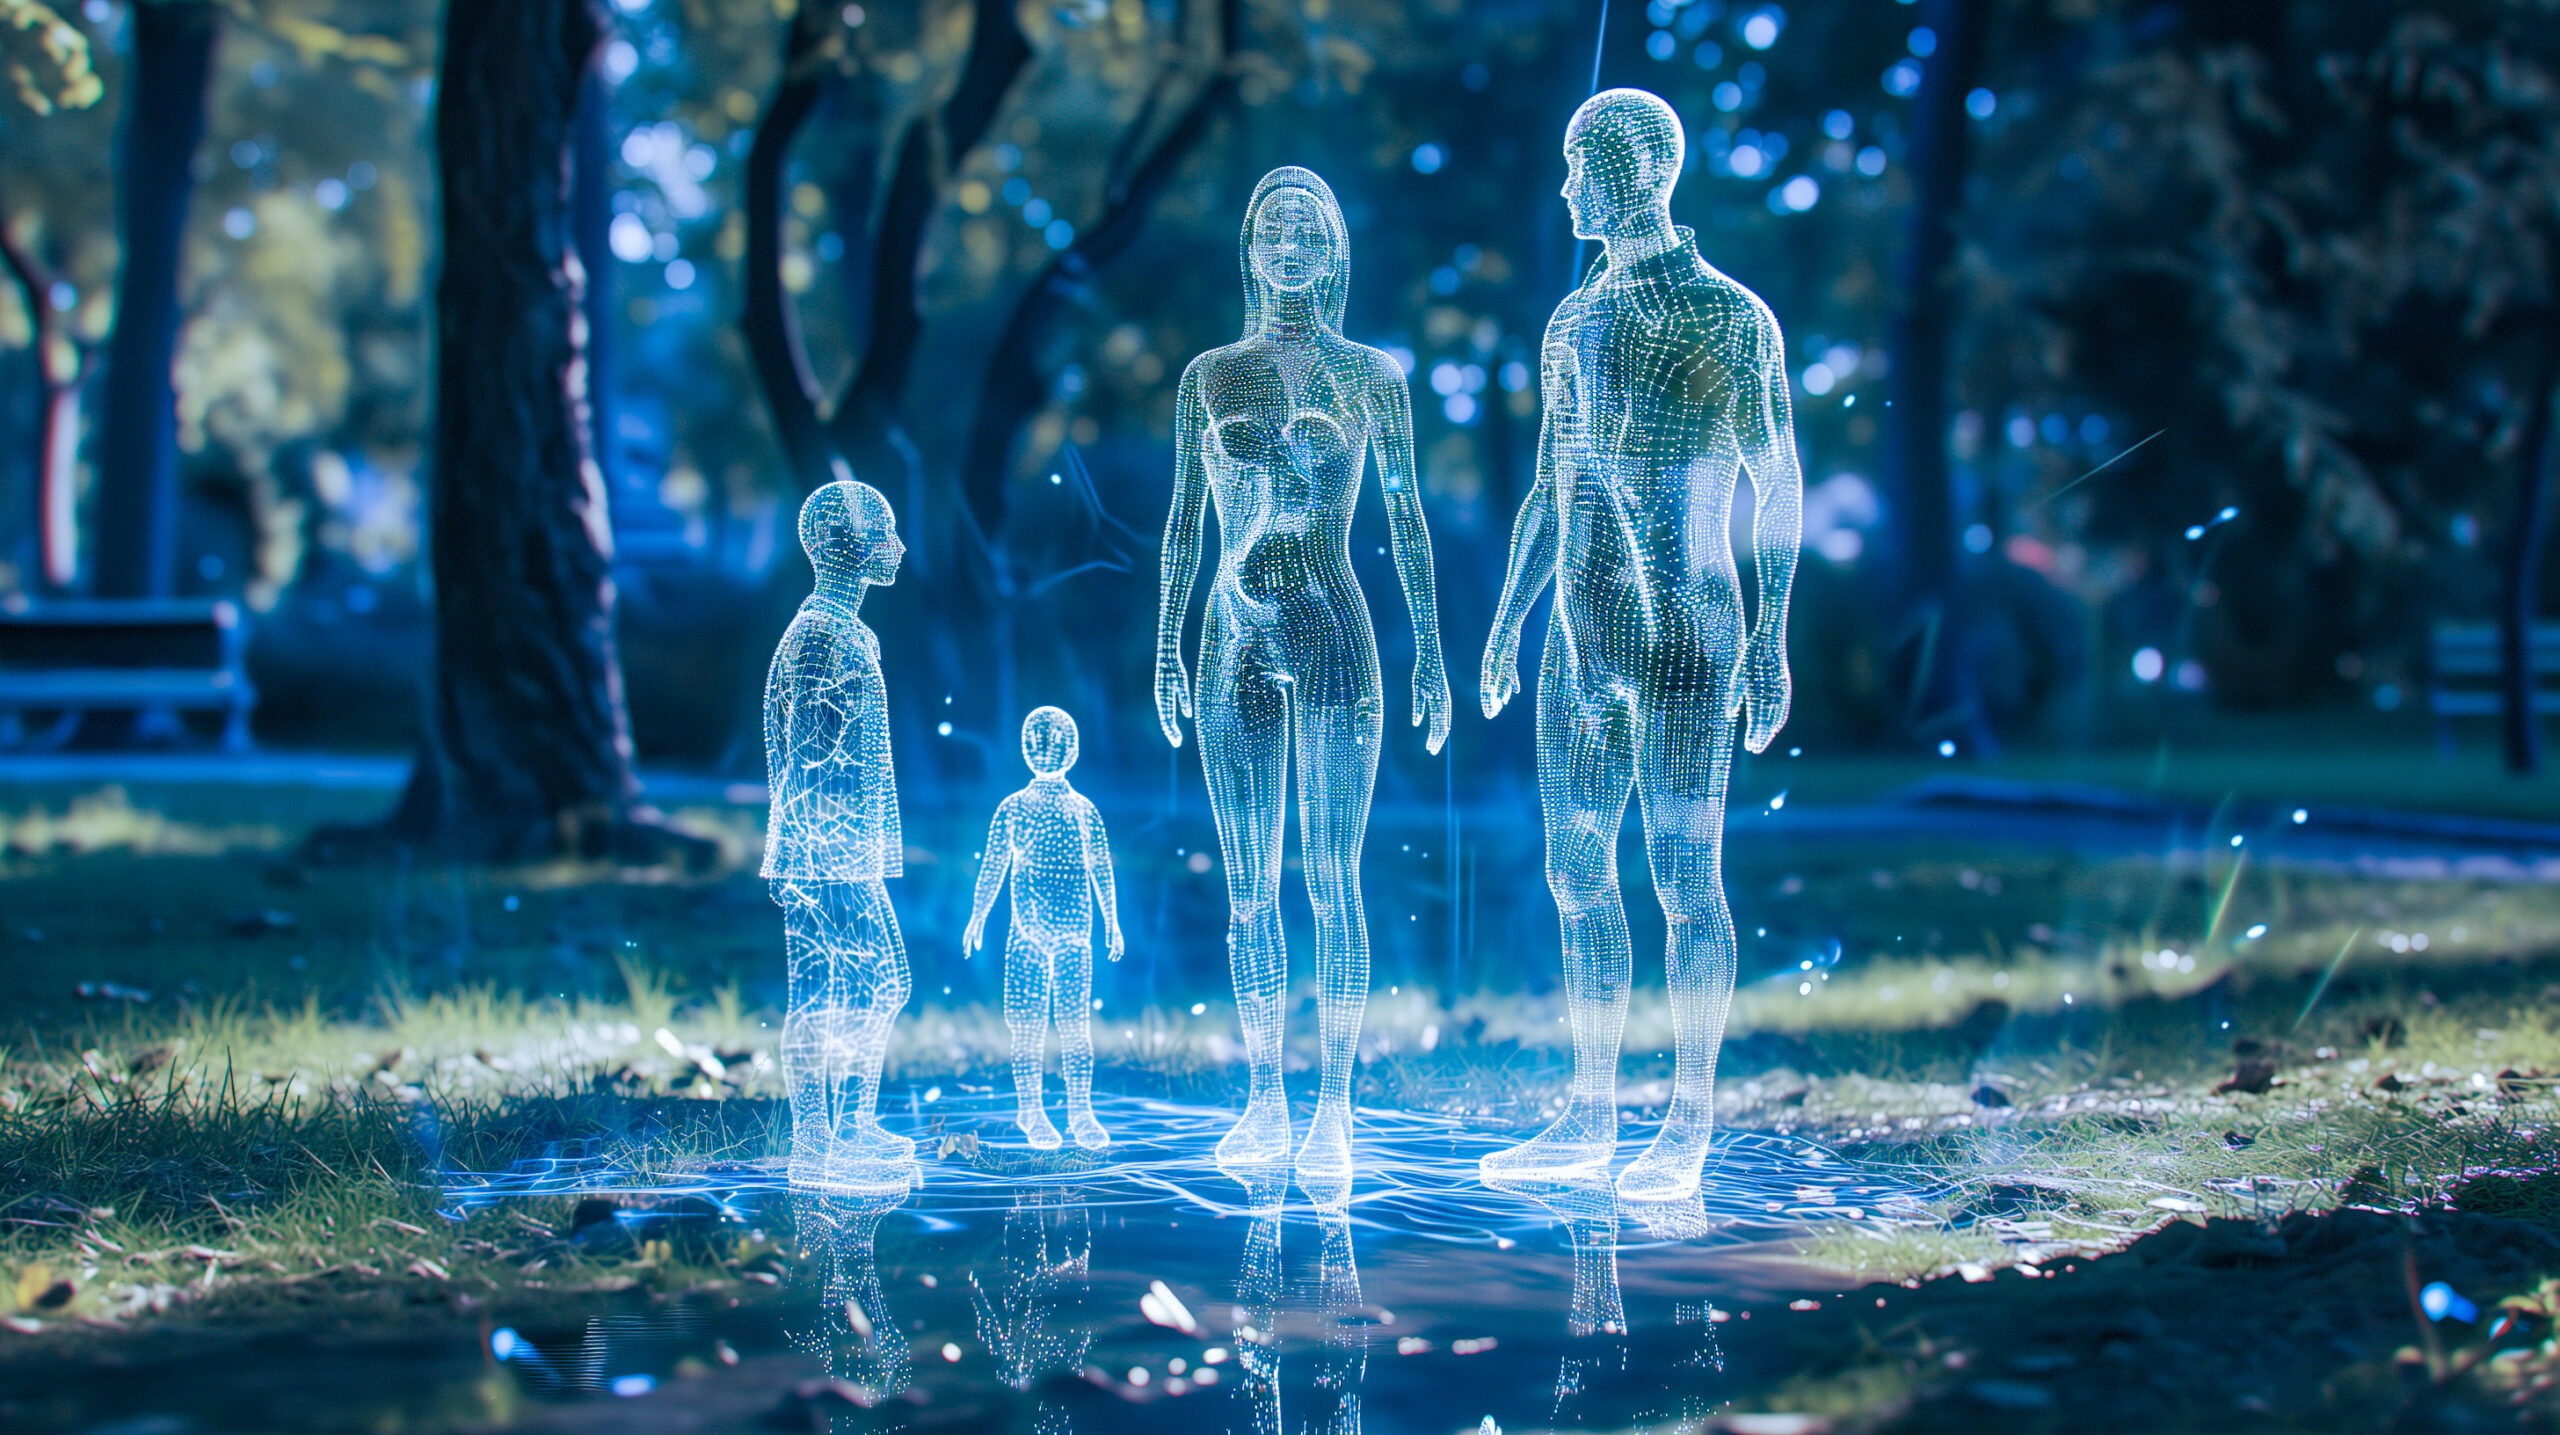 In "Fragments of a Rose," a holographic family—two adults and two children—shine in golden light, standing in a park, as AI projections of past human life.